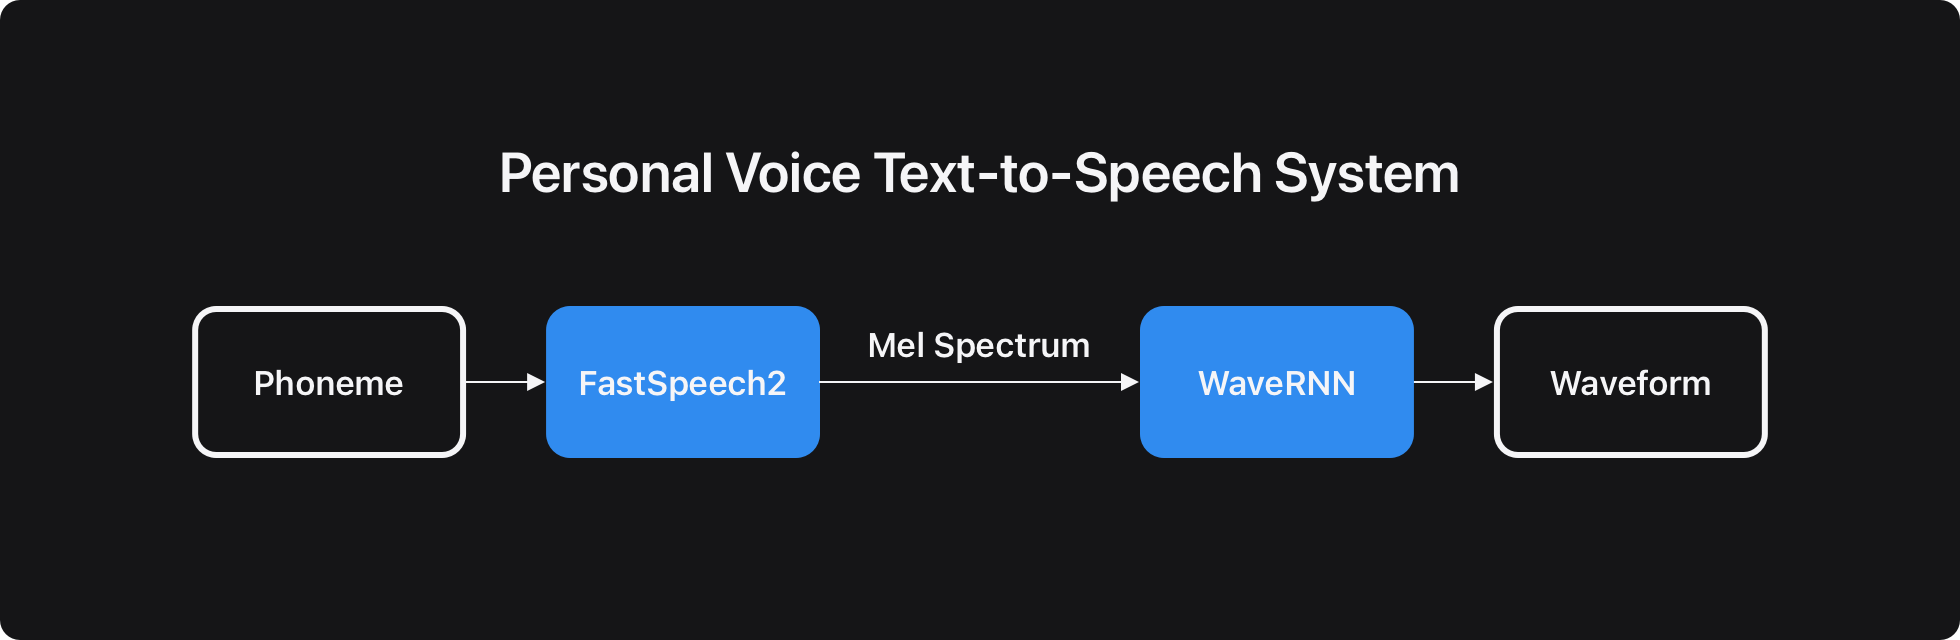 A personal voice text-to-speech system diagram.